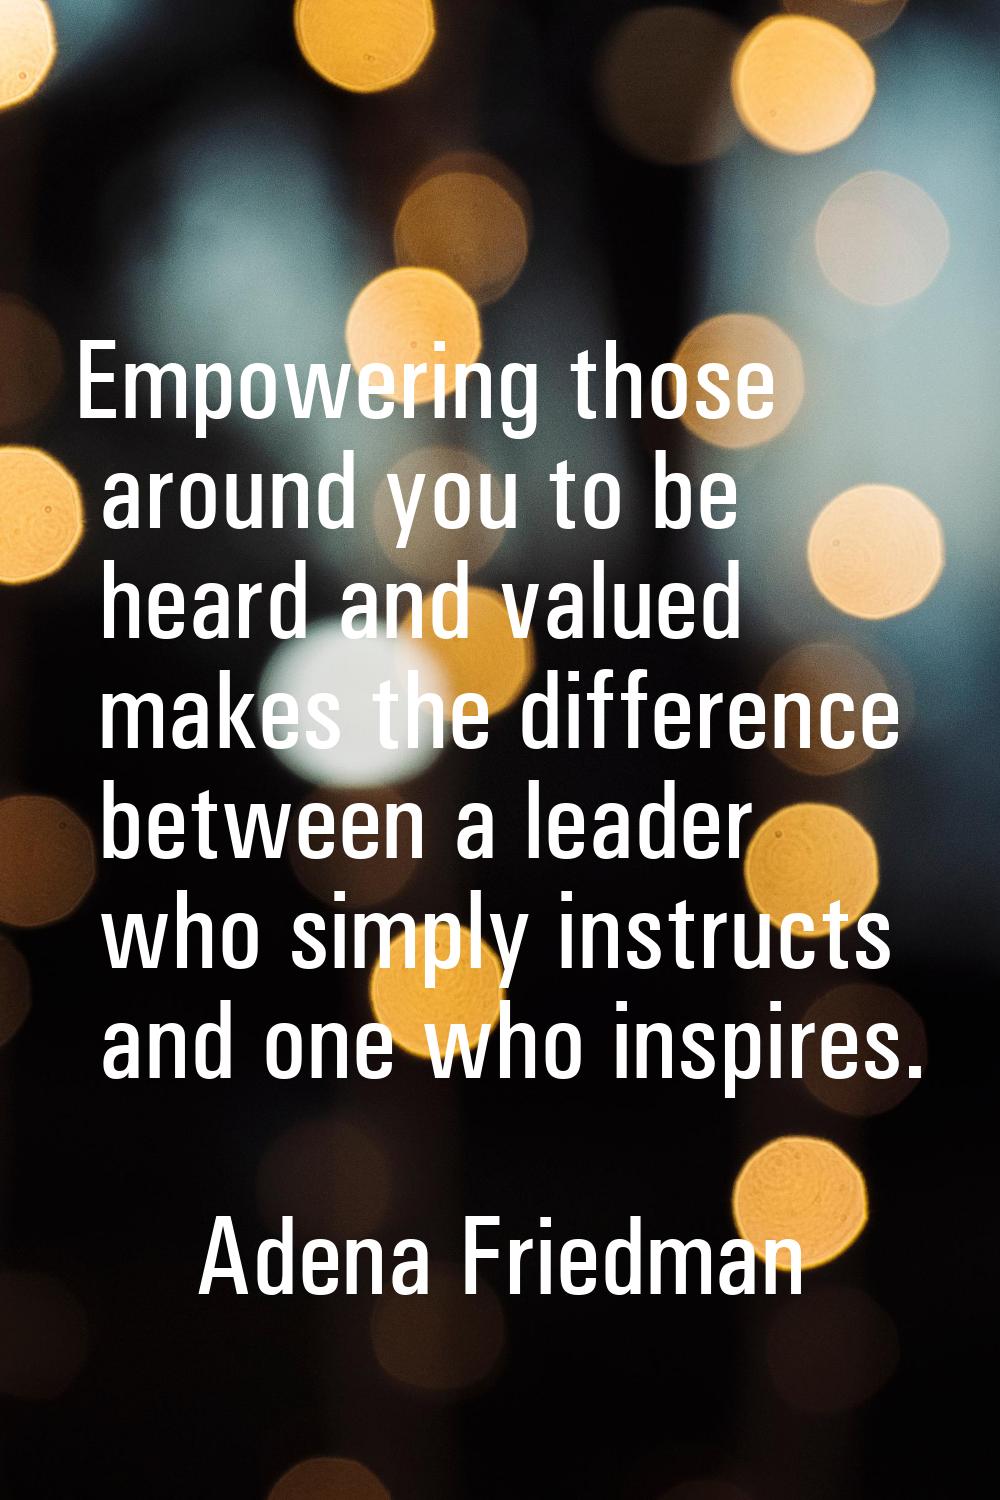 Empowering those around you to be heard and valued makes the difference between a leader who simply